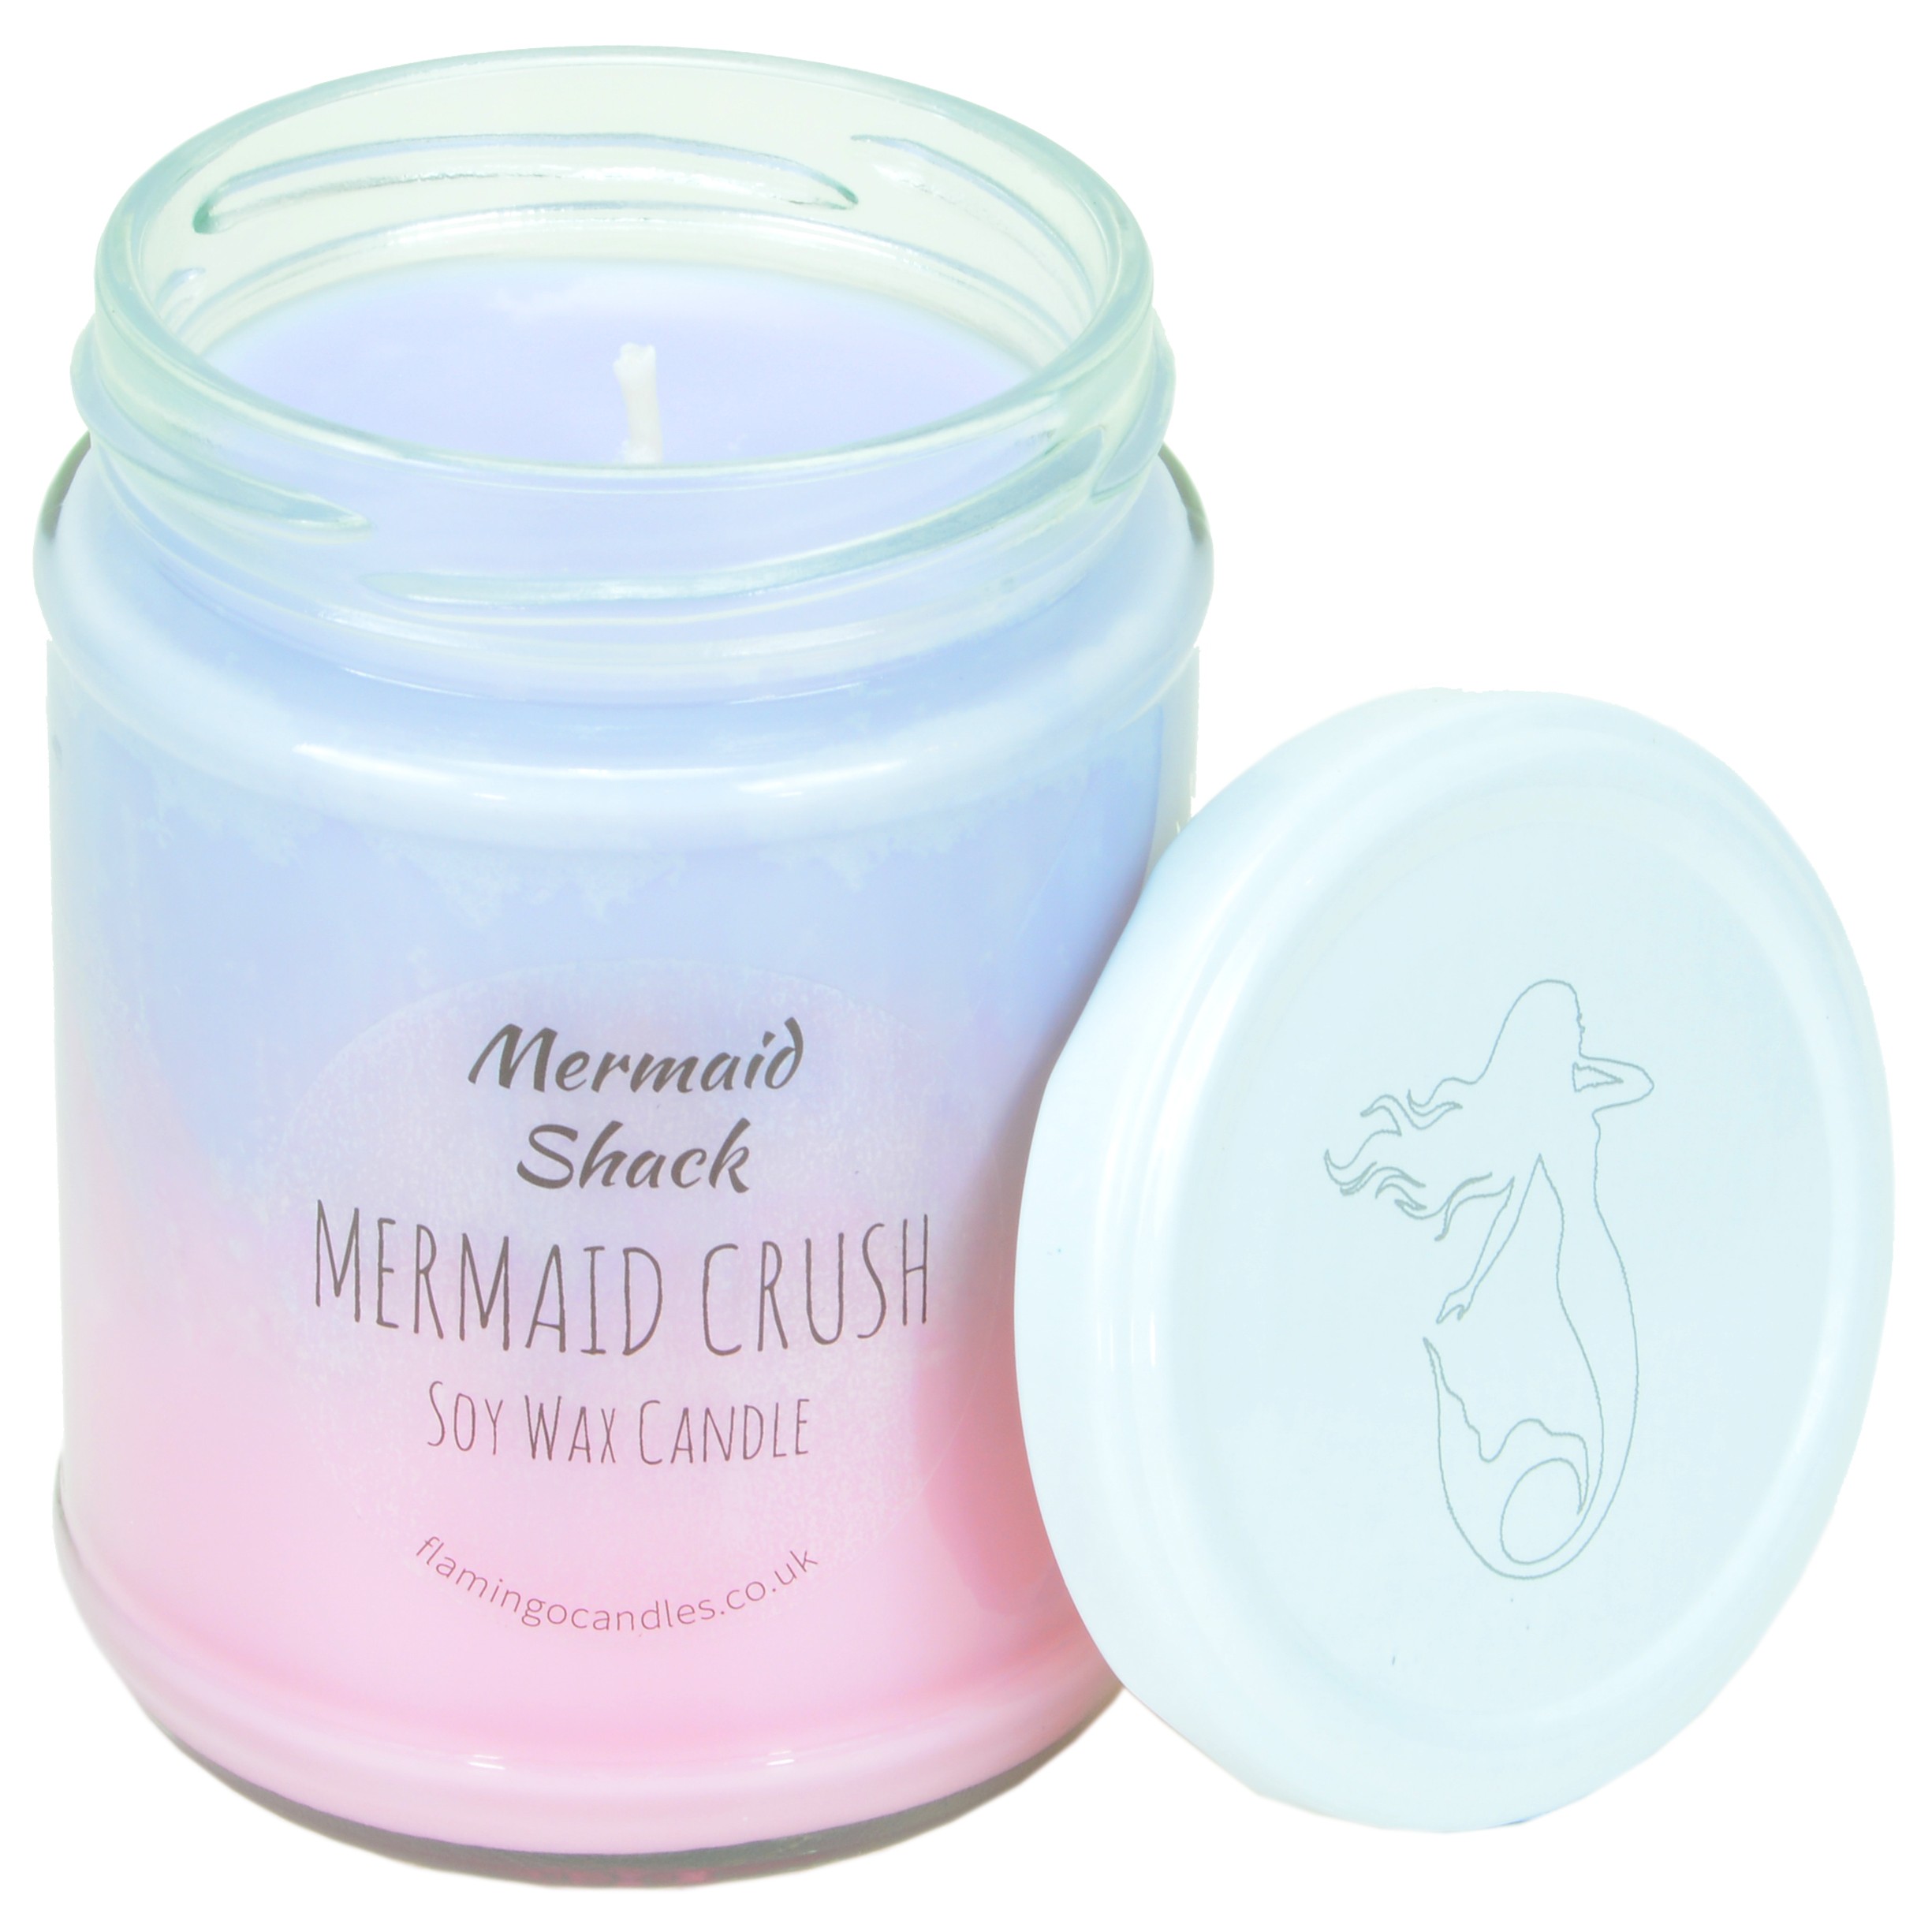 Mermaid Crush Purple/Pink Ombre Candle - Flamingo Candles